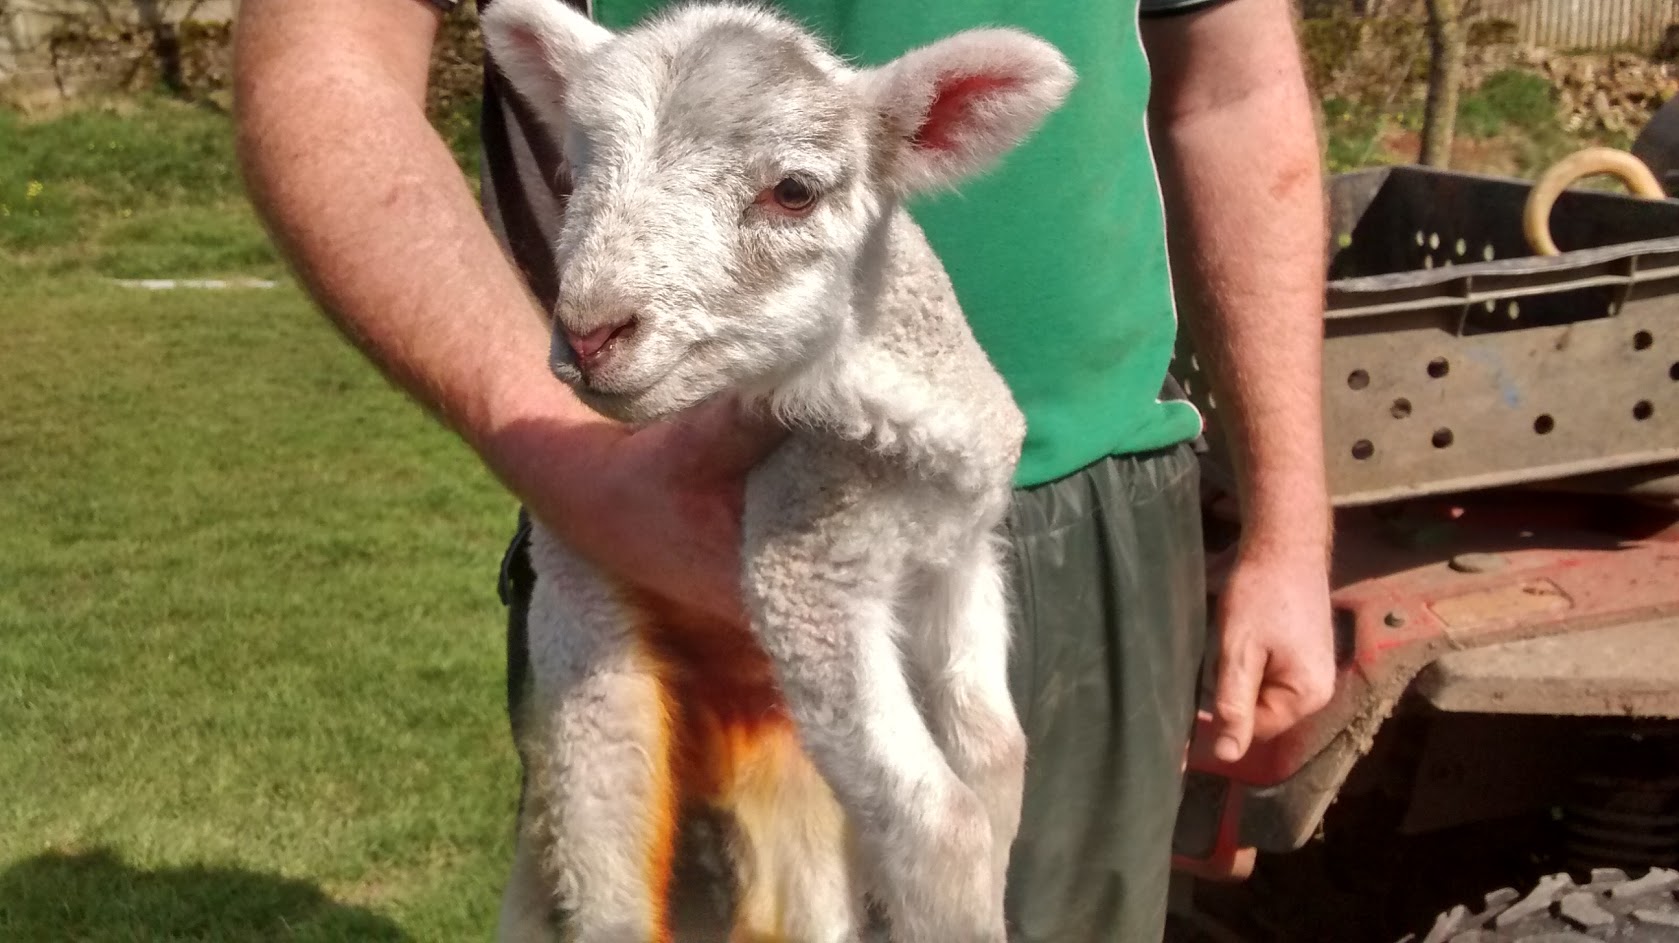 The lost lamb wandered onto a golf course, but was eventually rescued